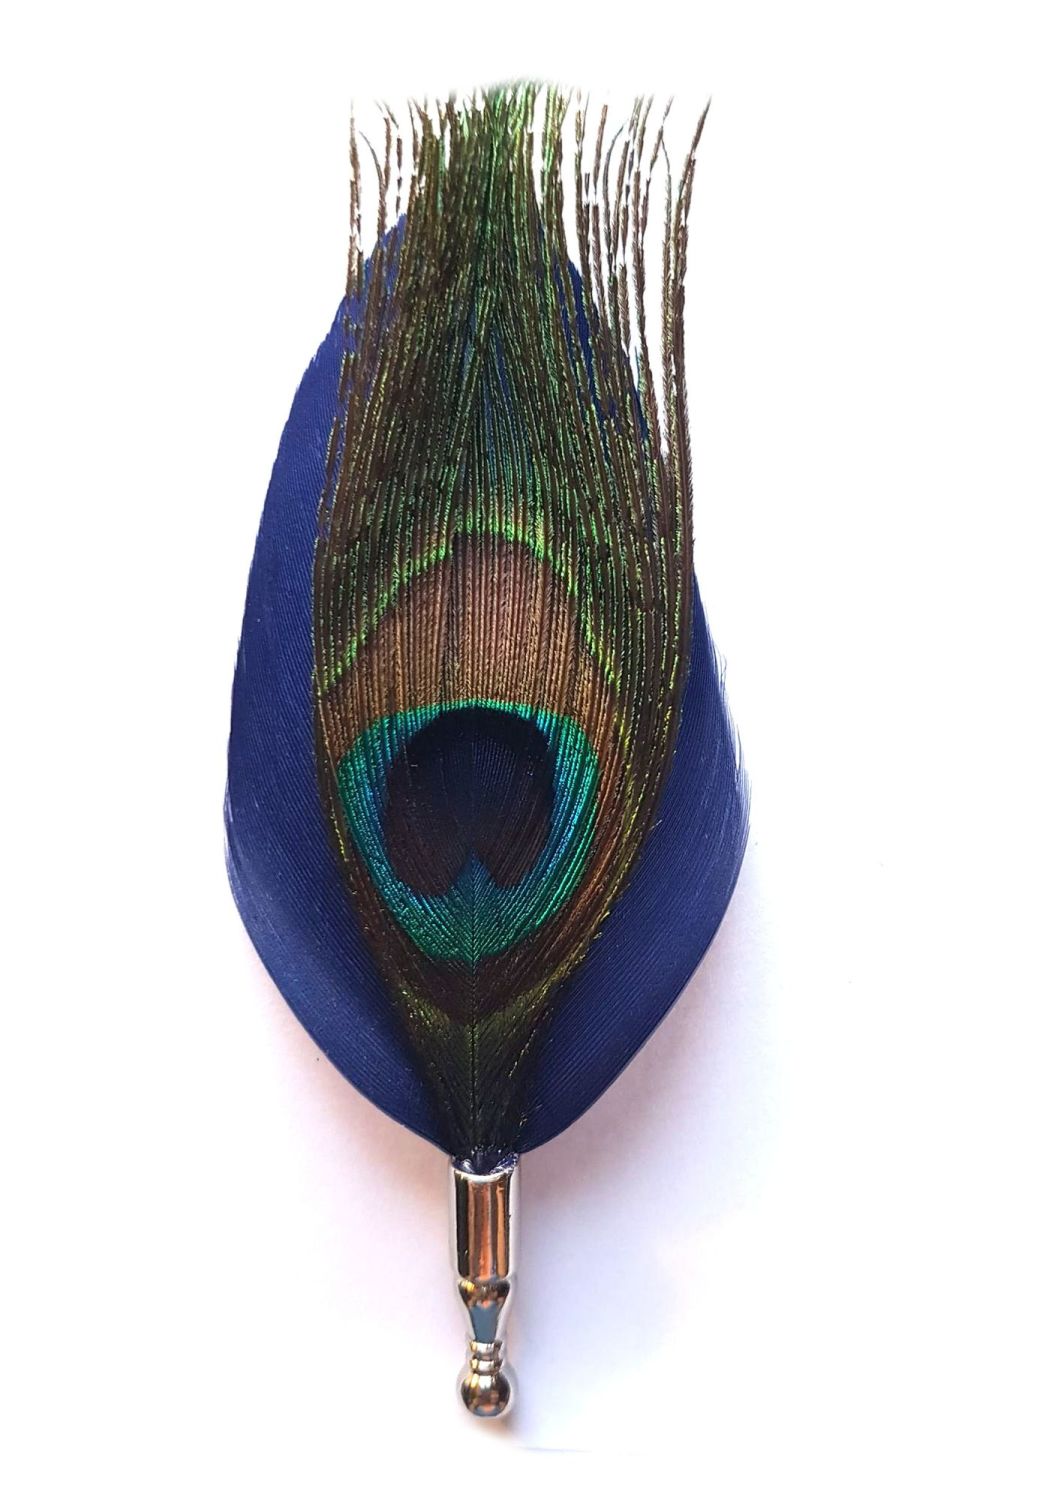 Feather Boutonnière Buttonhole - Peacock and Navy Blue Feathers